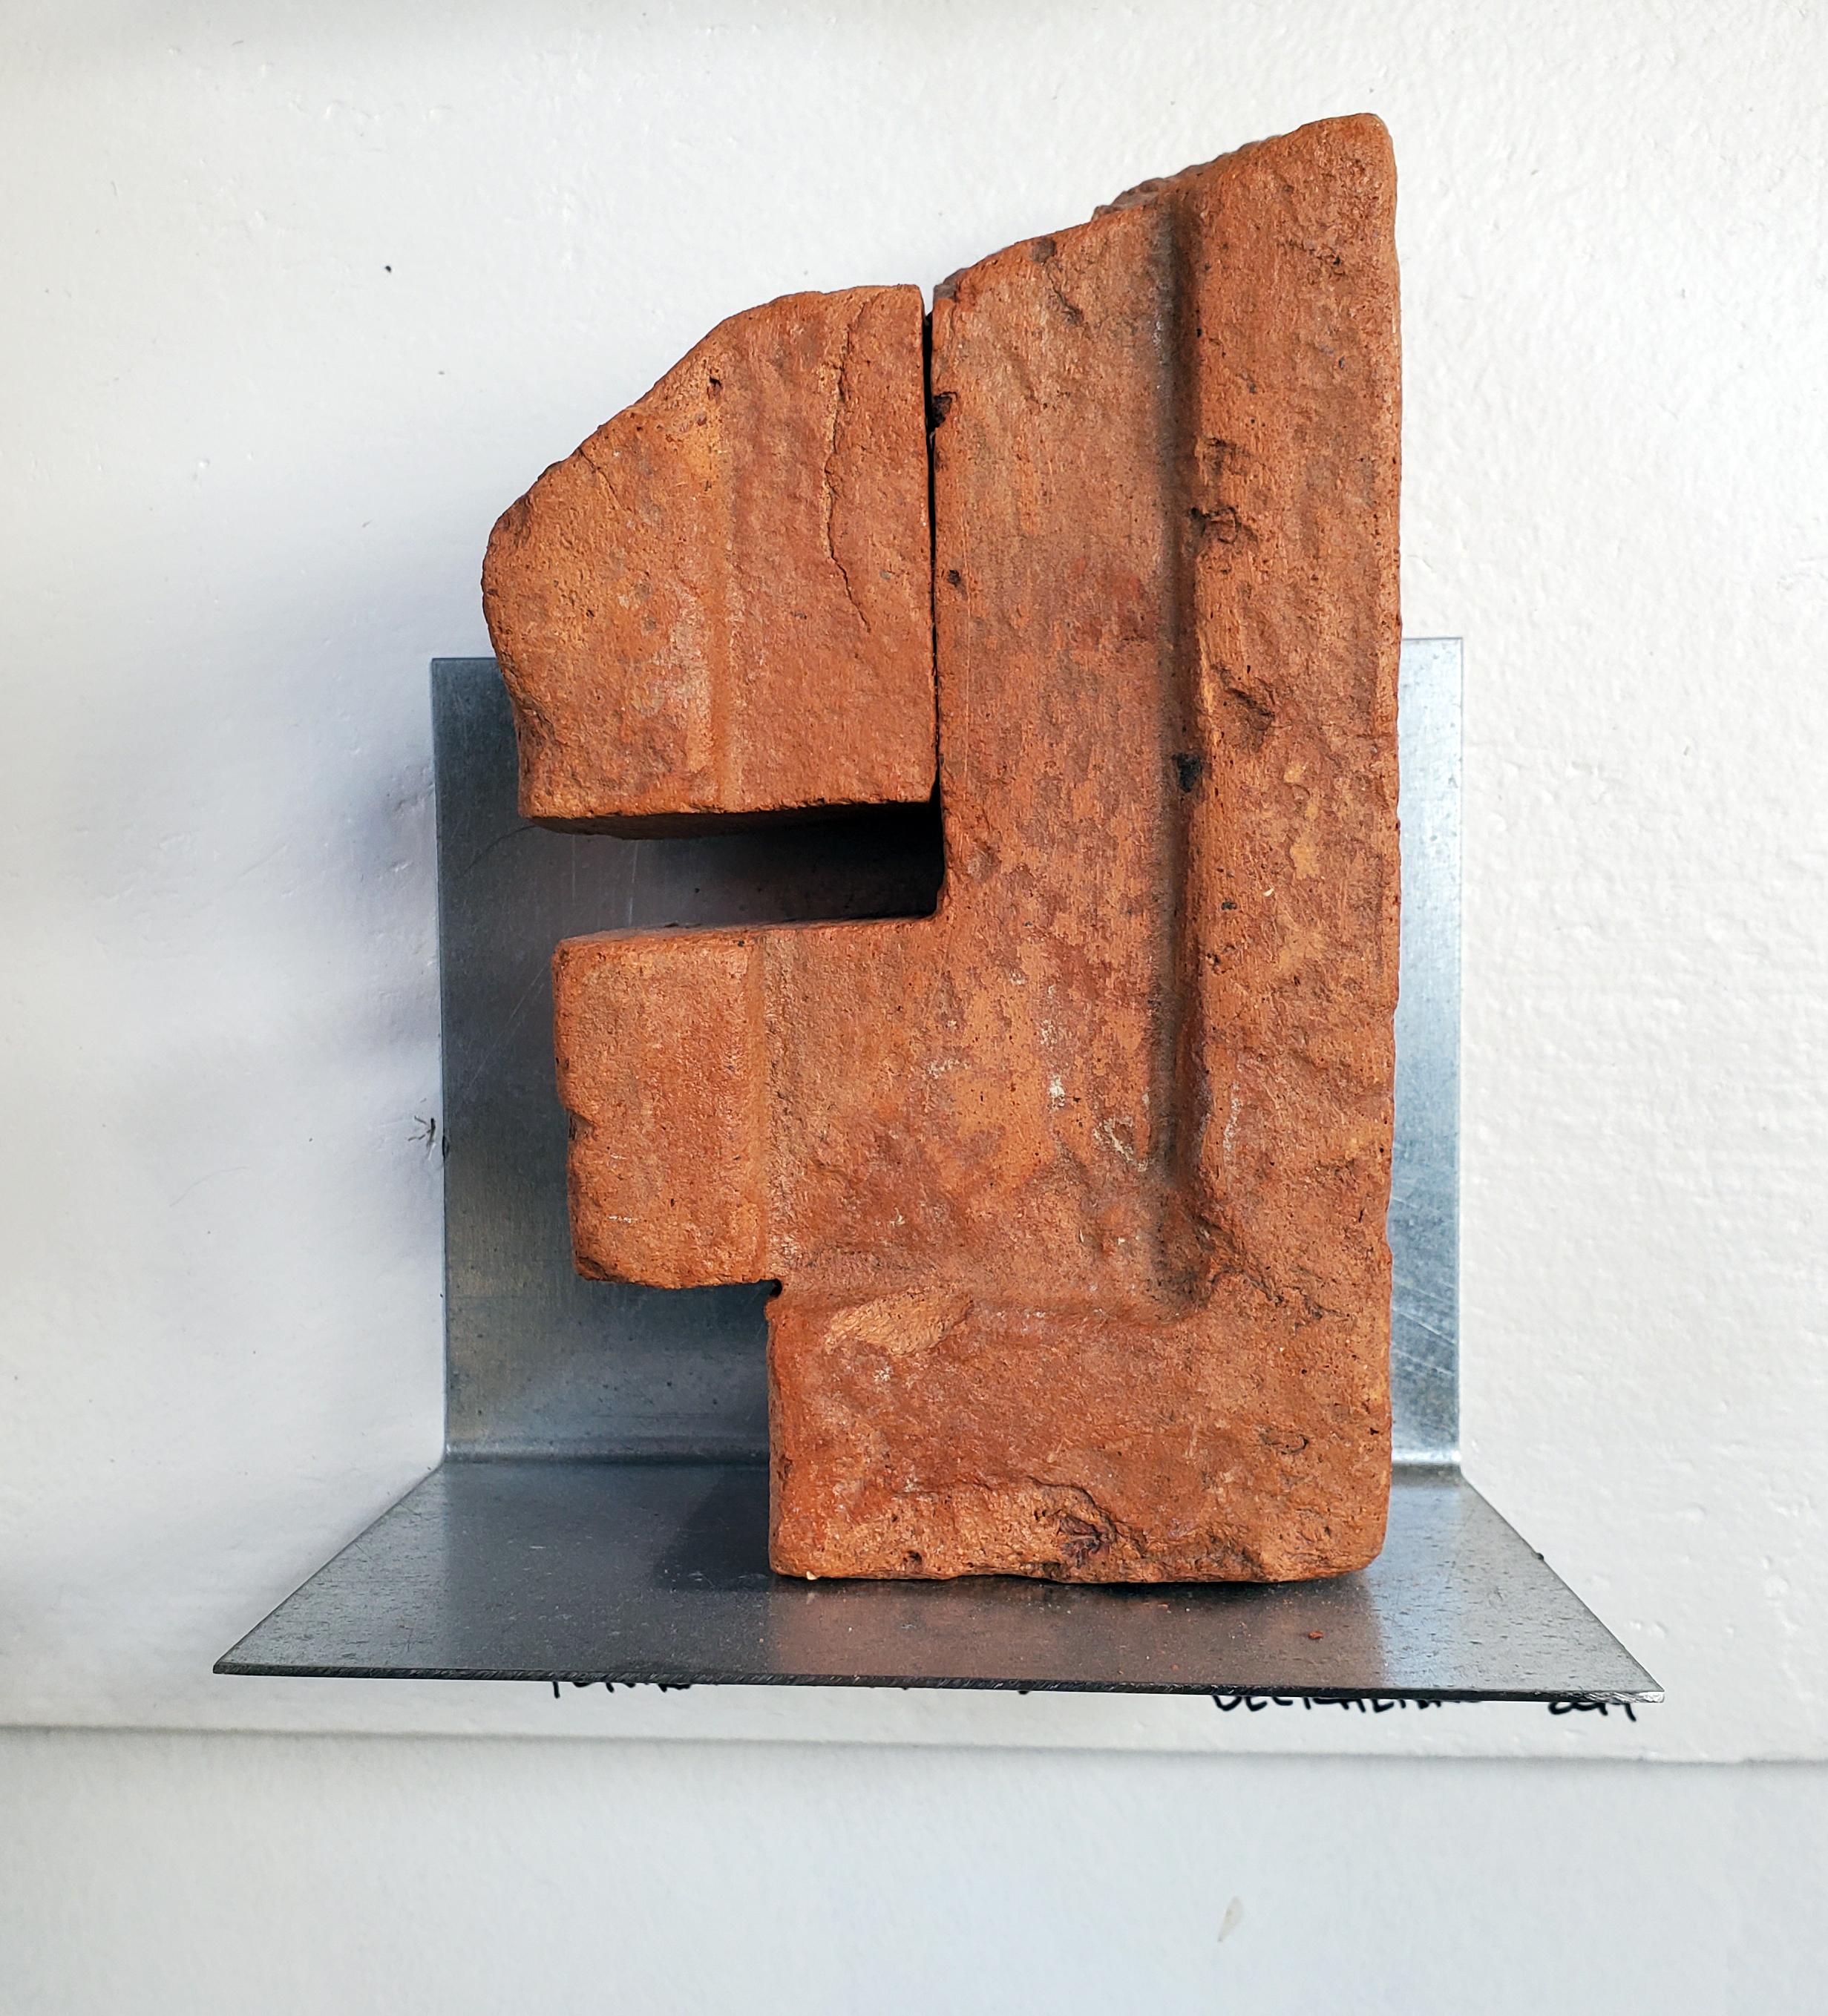 Compelling wall relief sculpture creates artistic puzzle, 